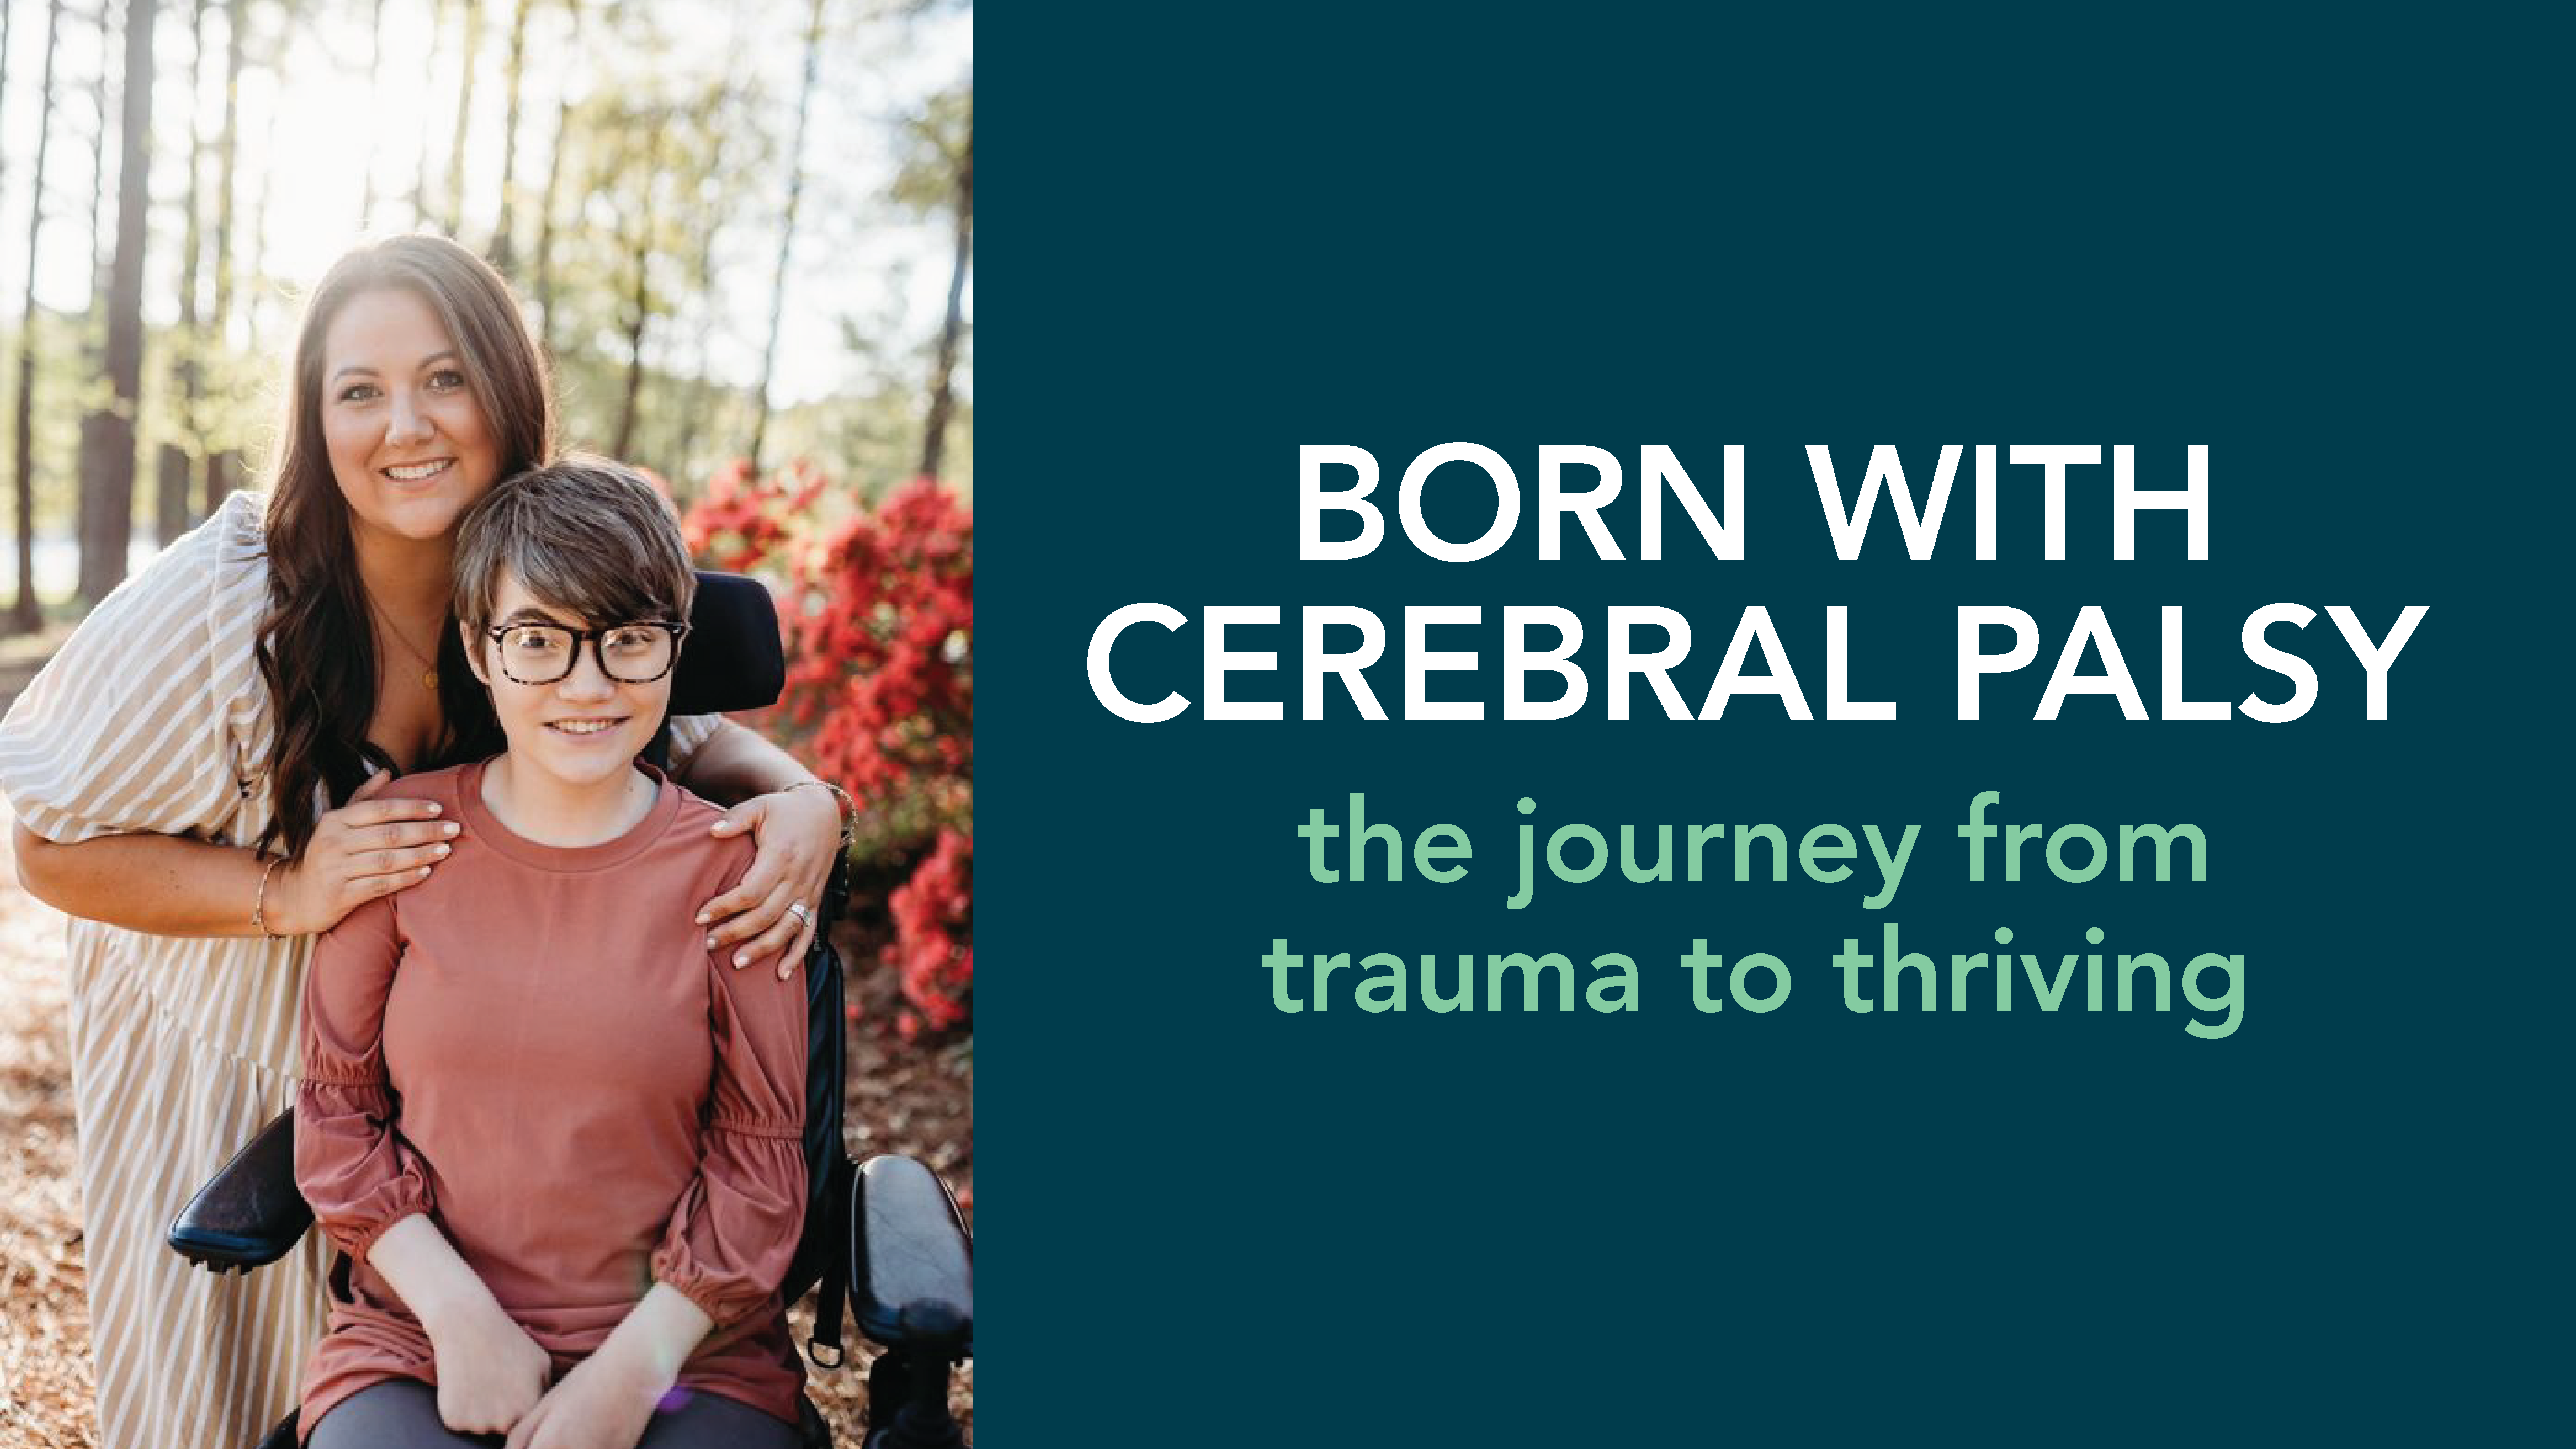 Born with Cerebral Palsy: The Journey From Trauma to Thriving